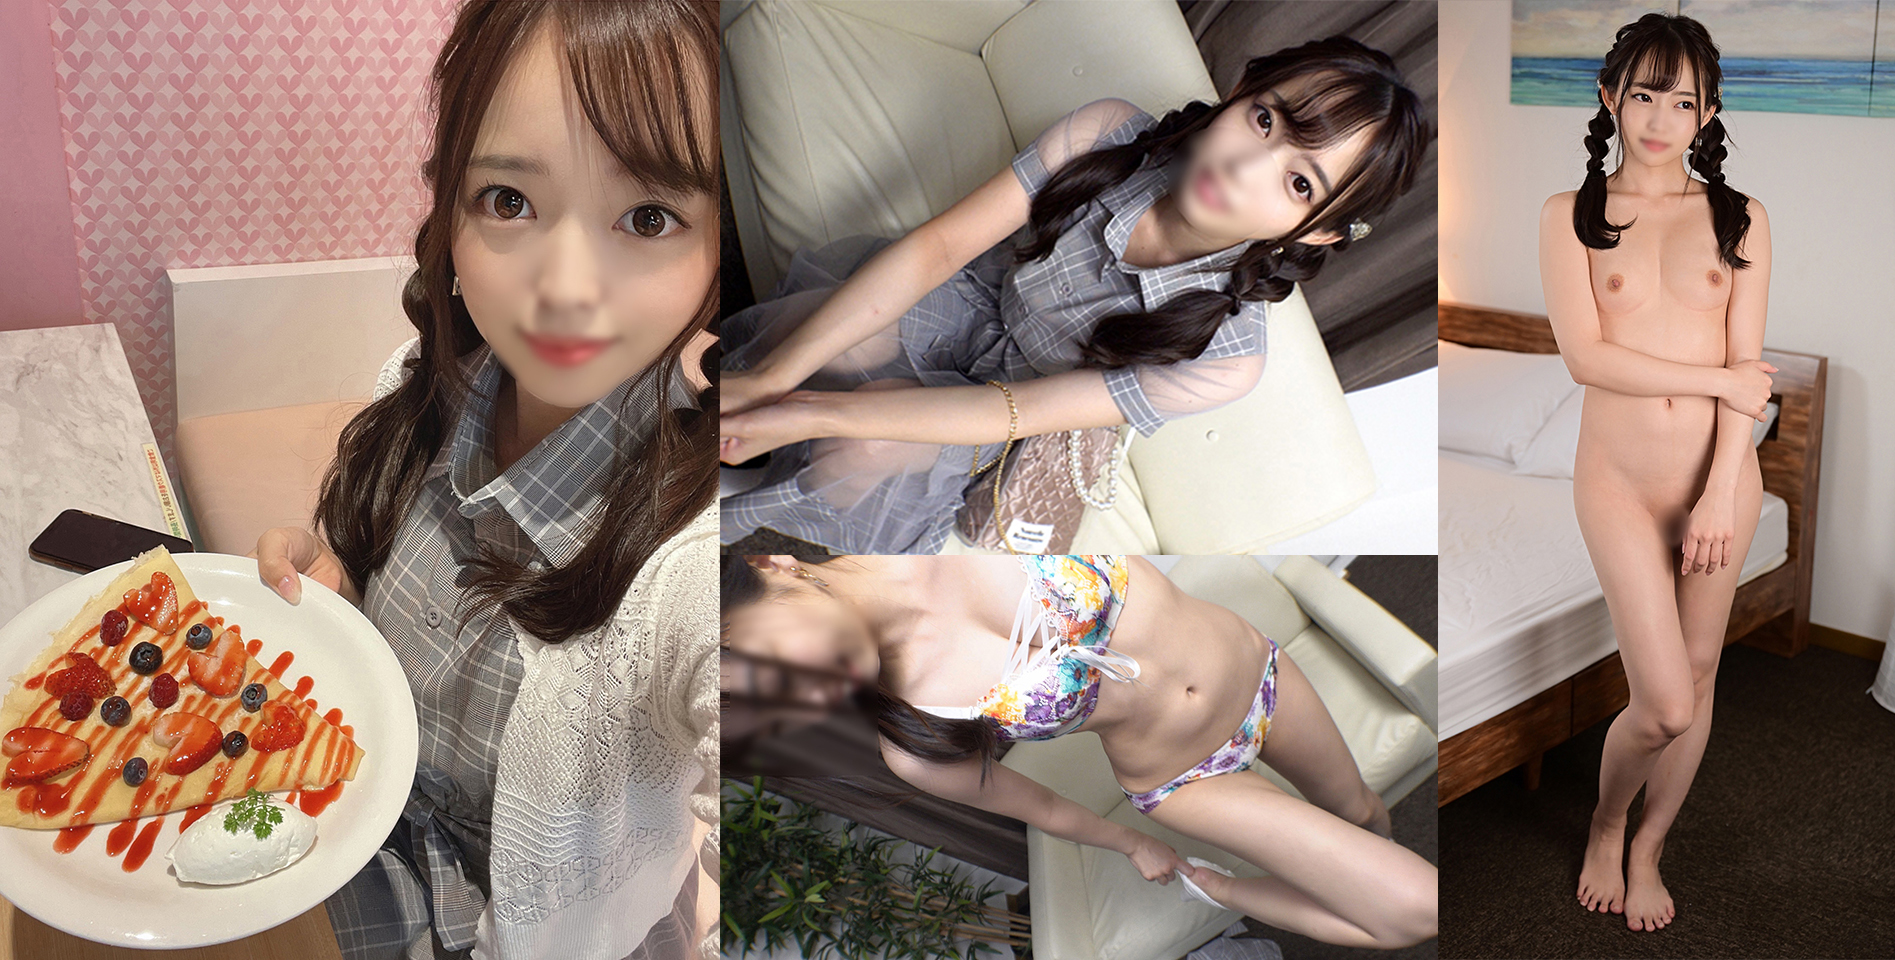 Appearance Nursing student Idol face beautiful girl 19 Leaked personal shooting where a slender body is excited and vaginal cum shot by removing the squirrel while studying